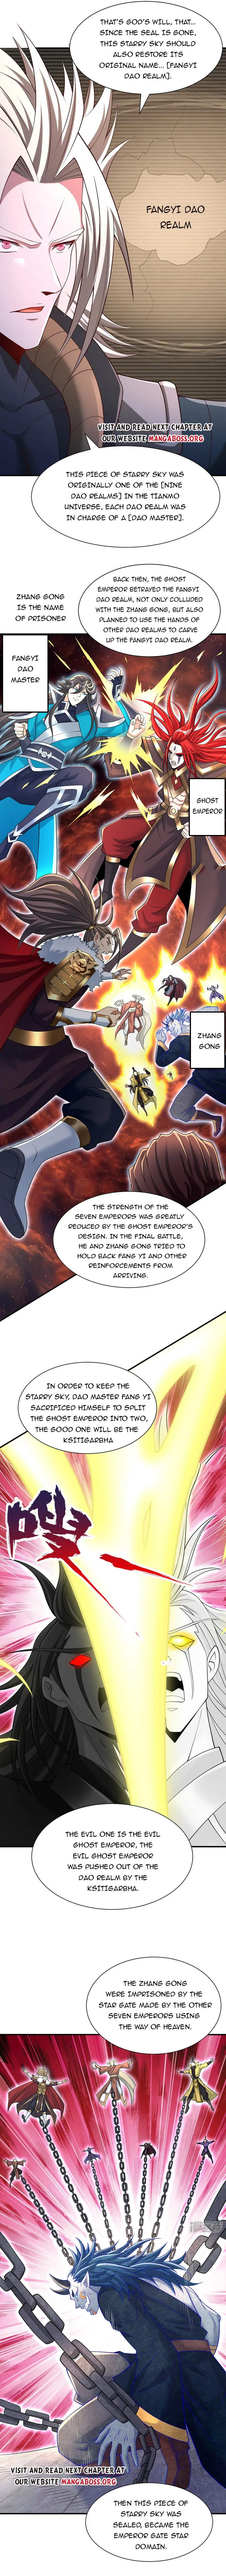 The Time Of Rebirth - Page 2